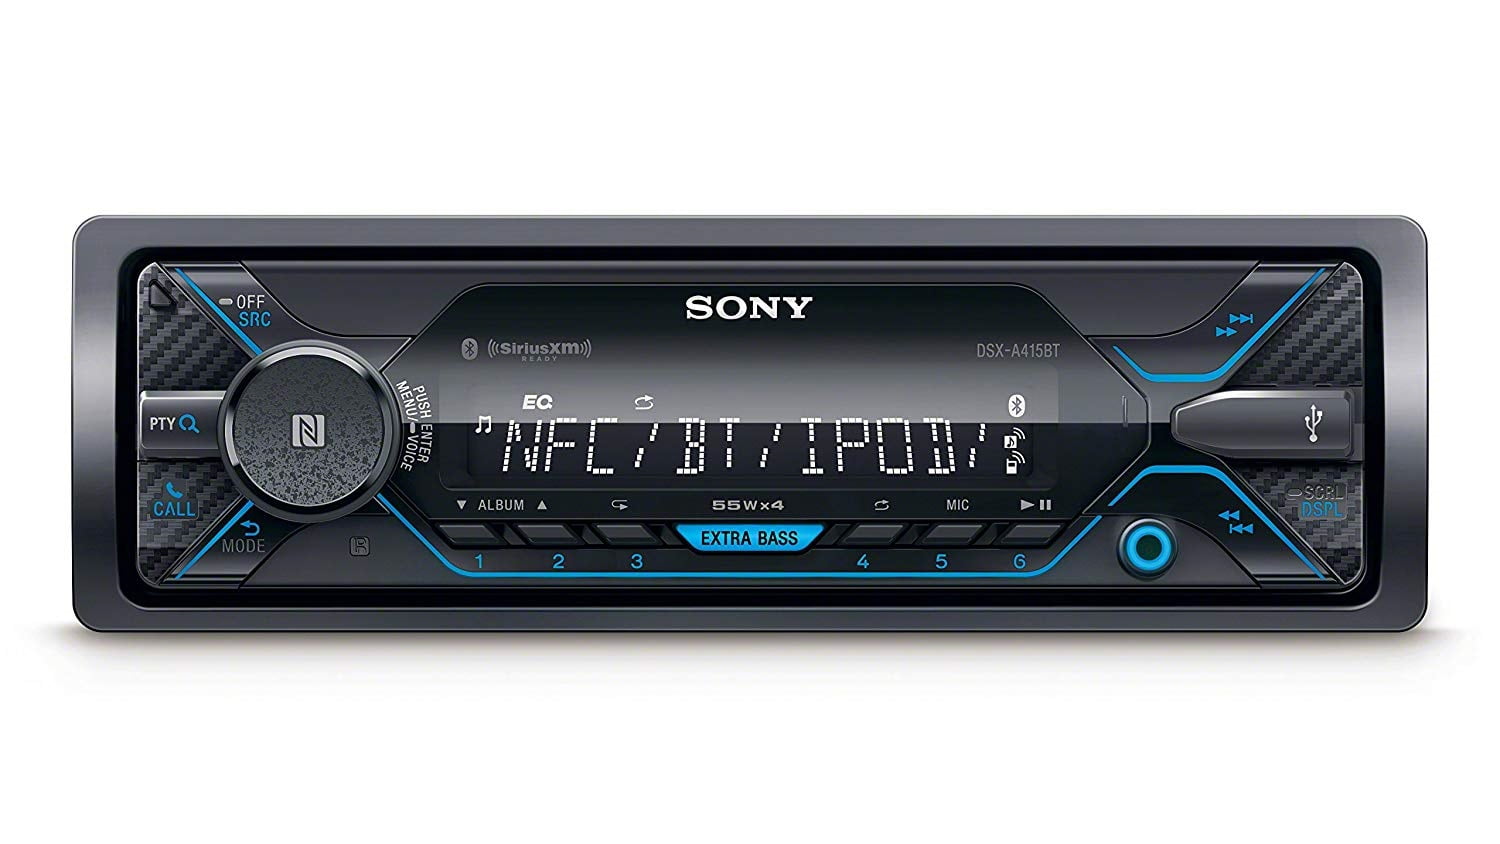 Sony DSX-A415BT Single DIN Bluetooth In-Dash Digital Media Car Stereo  Receiver with Front 3.5 & USB Auxiliary Inputs | Autoradios